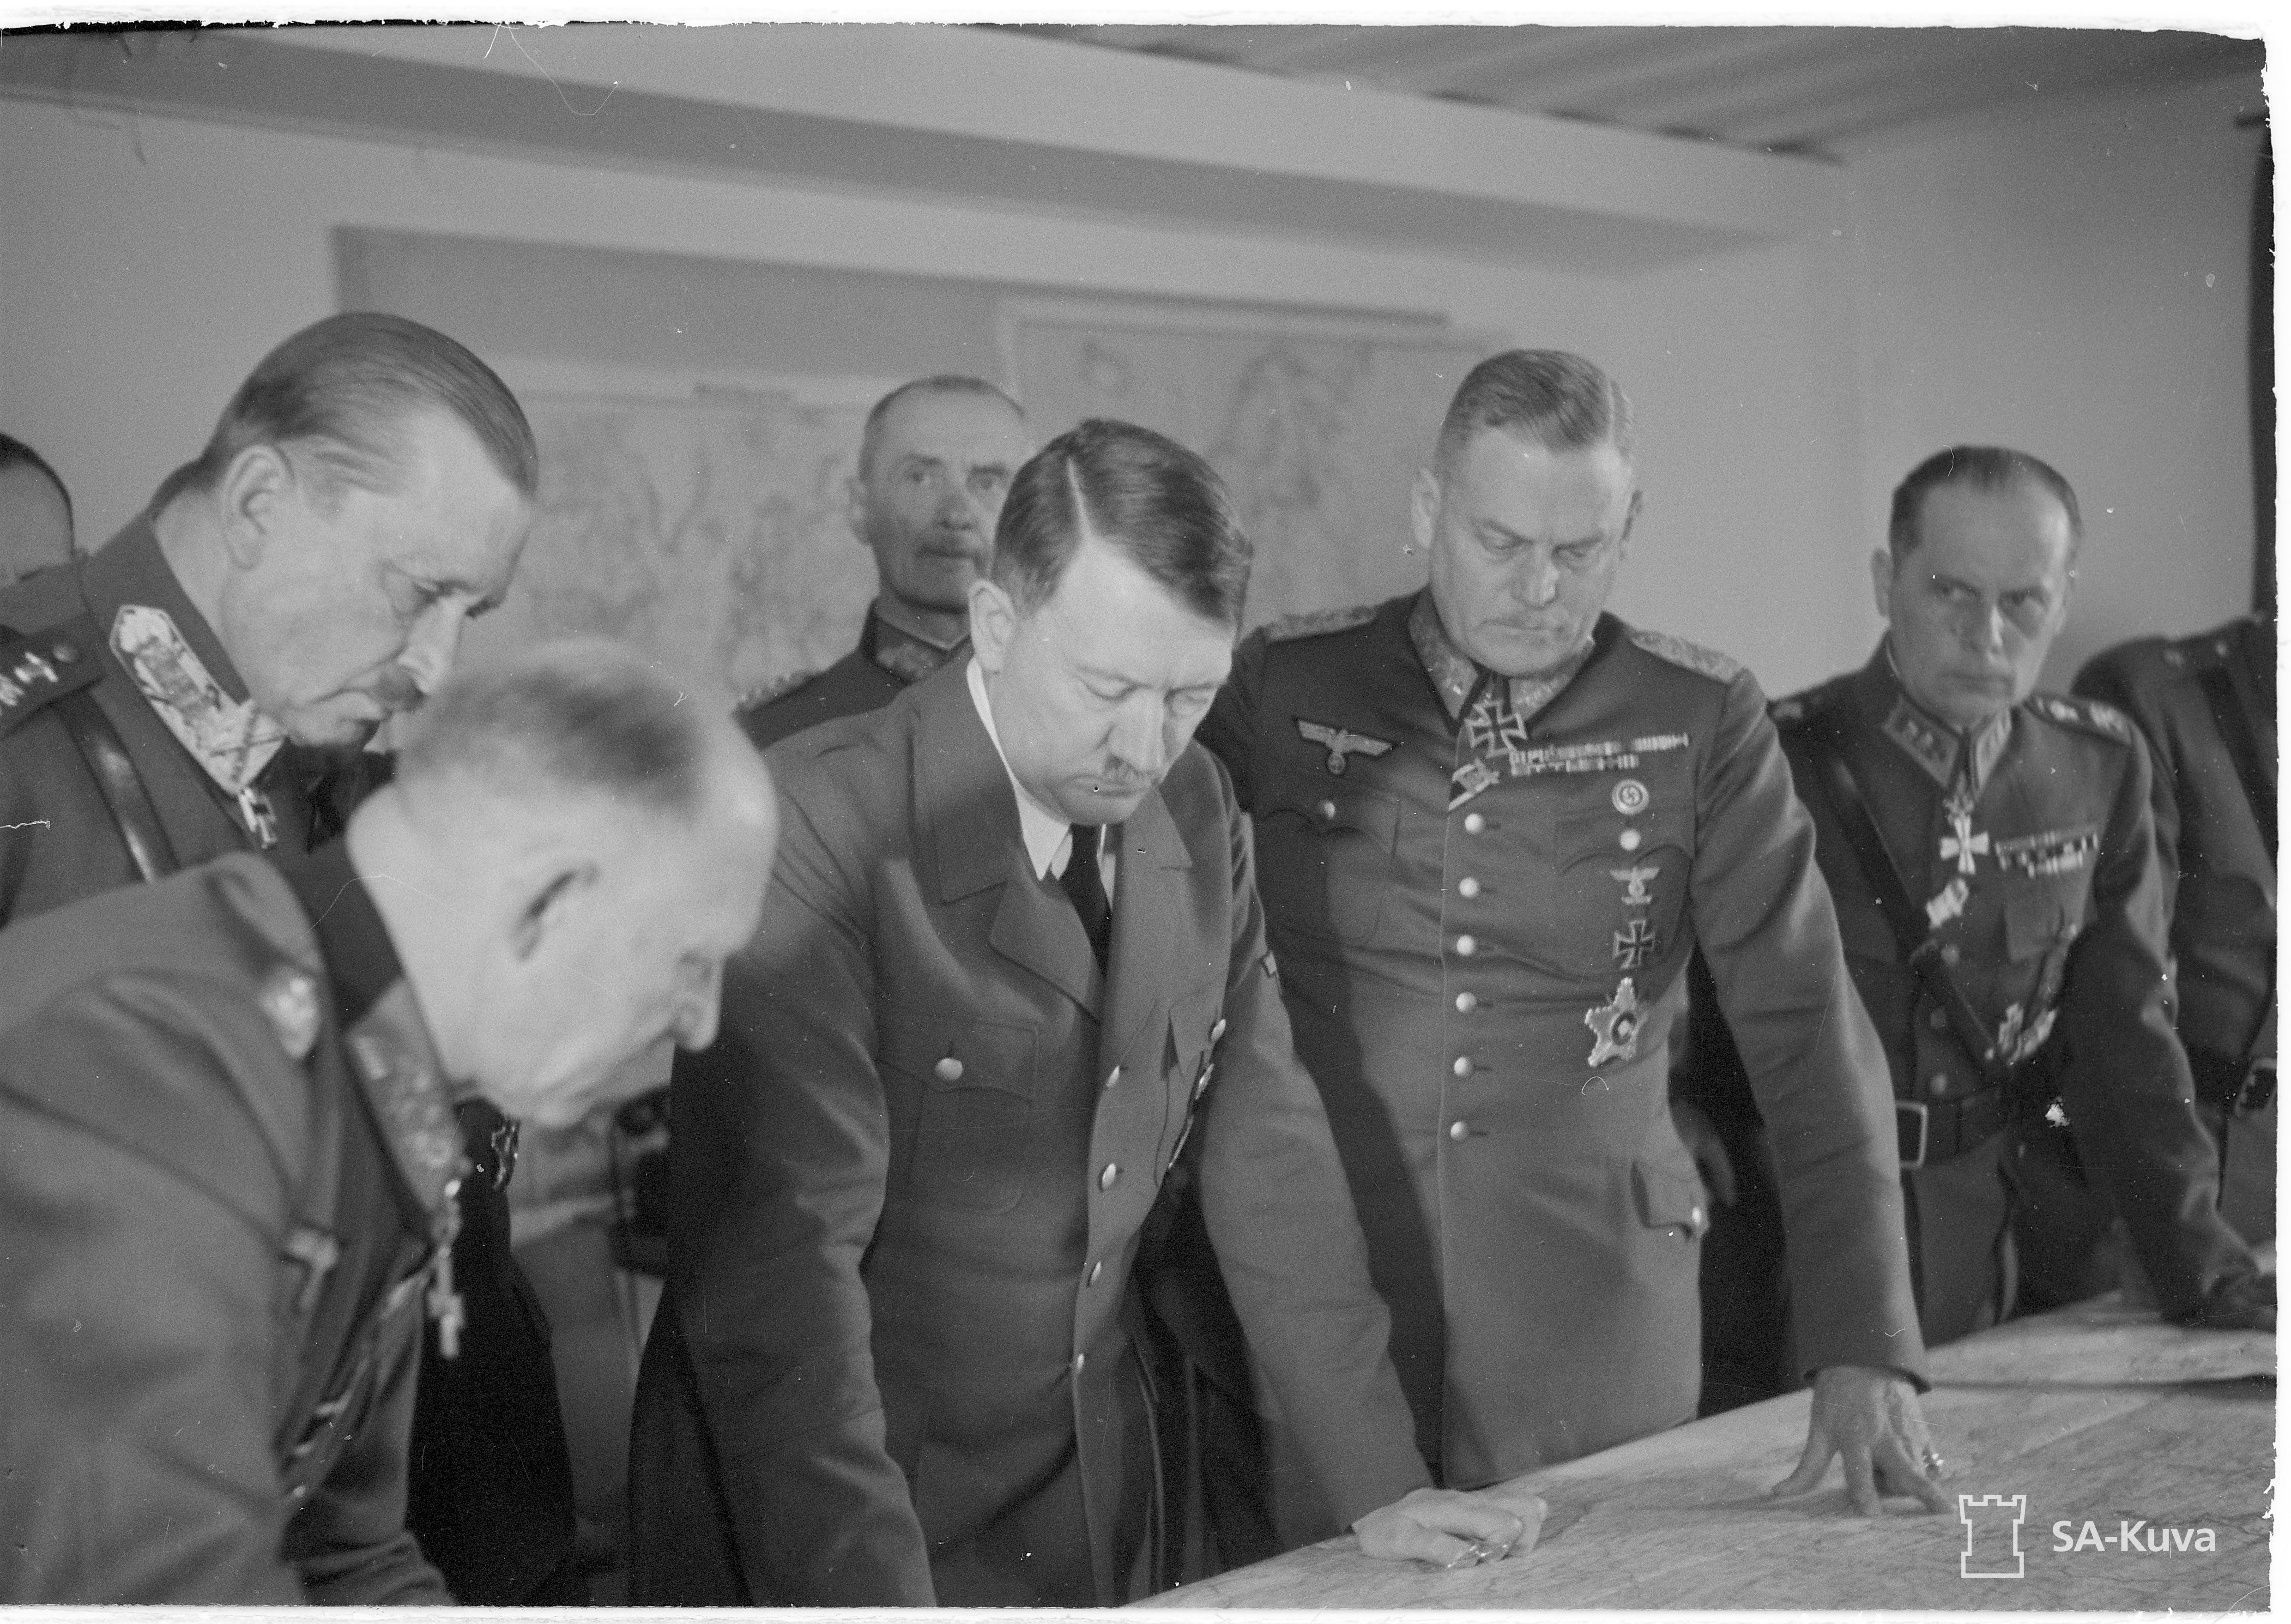 General Jodl presents a situation report of the Eastern front to Hitler and Mannerheim in the Wolfsschanze 